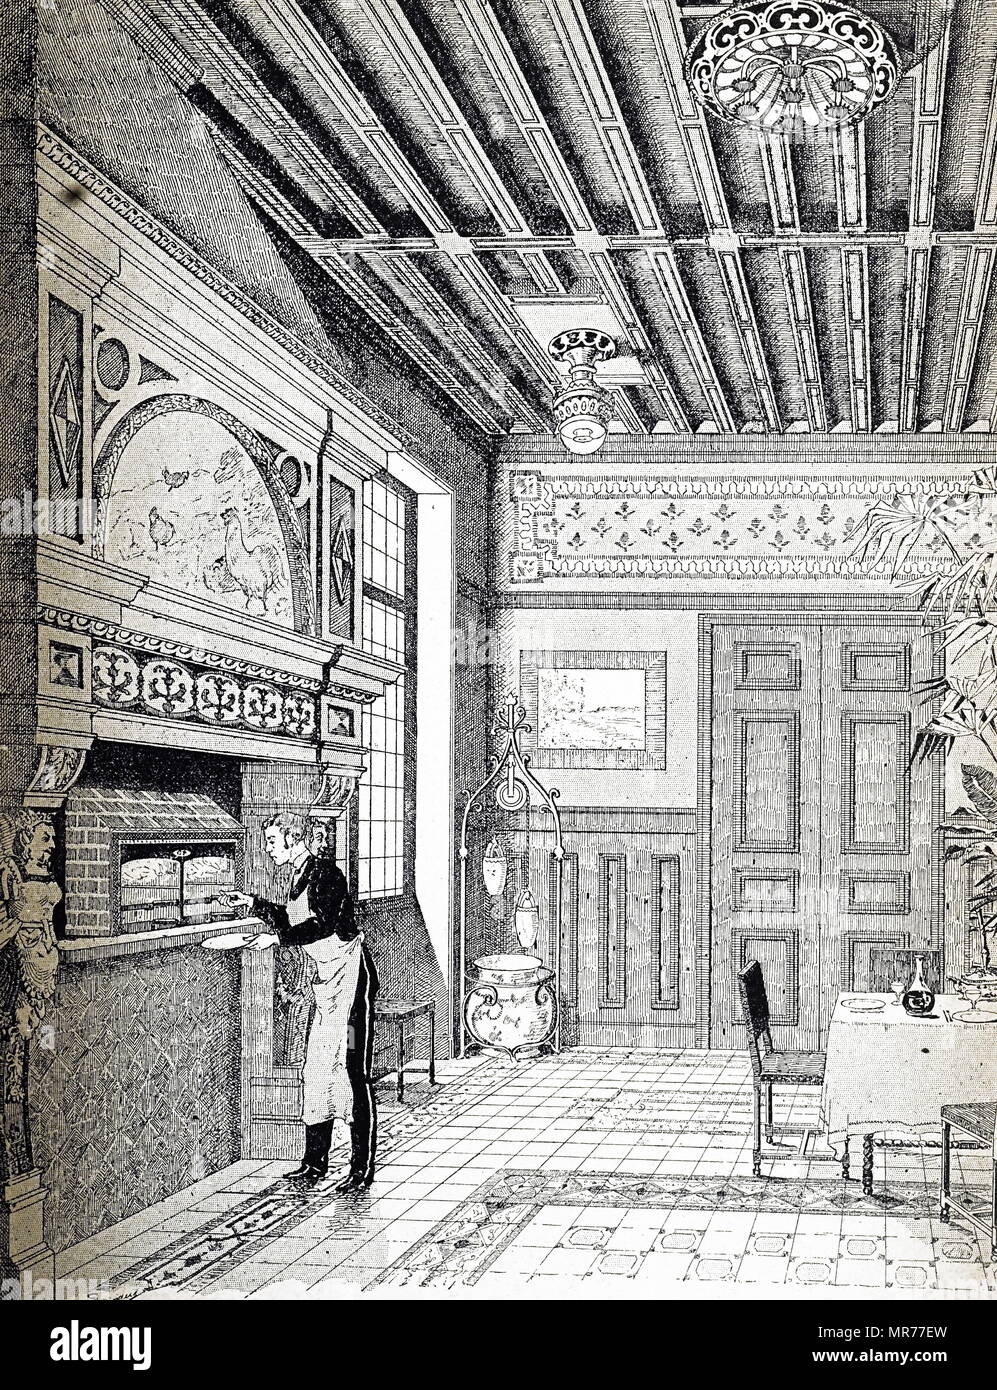 Engraving depicting the grill room in the Pavilion du Gaz at the Paris Exhibition of 1889. In the chimney is a grill by the Compagnie Parisienne which could grill 36 cutlets at a time. Dated 19th century Stock Photo